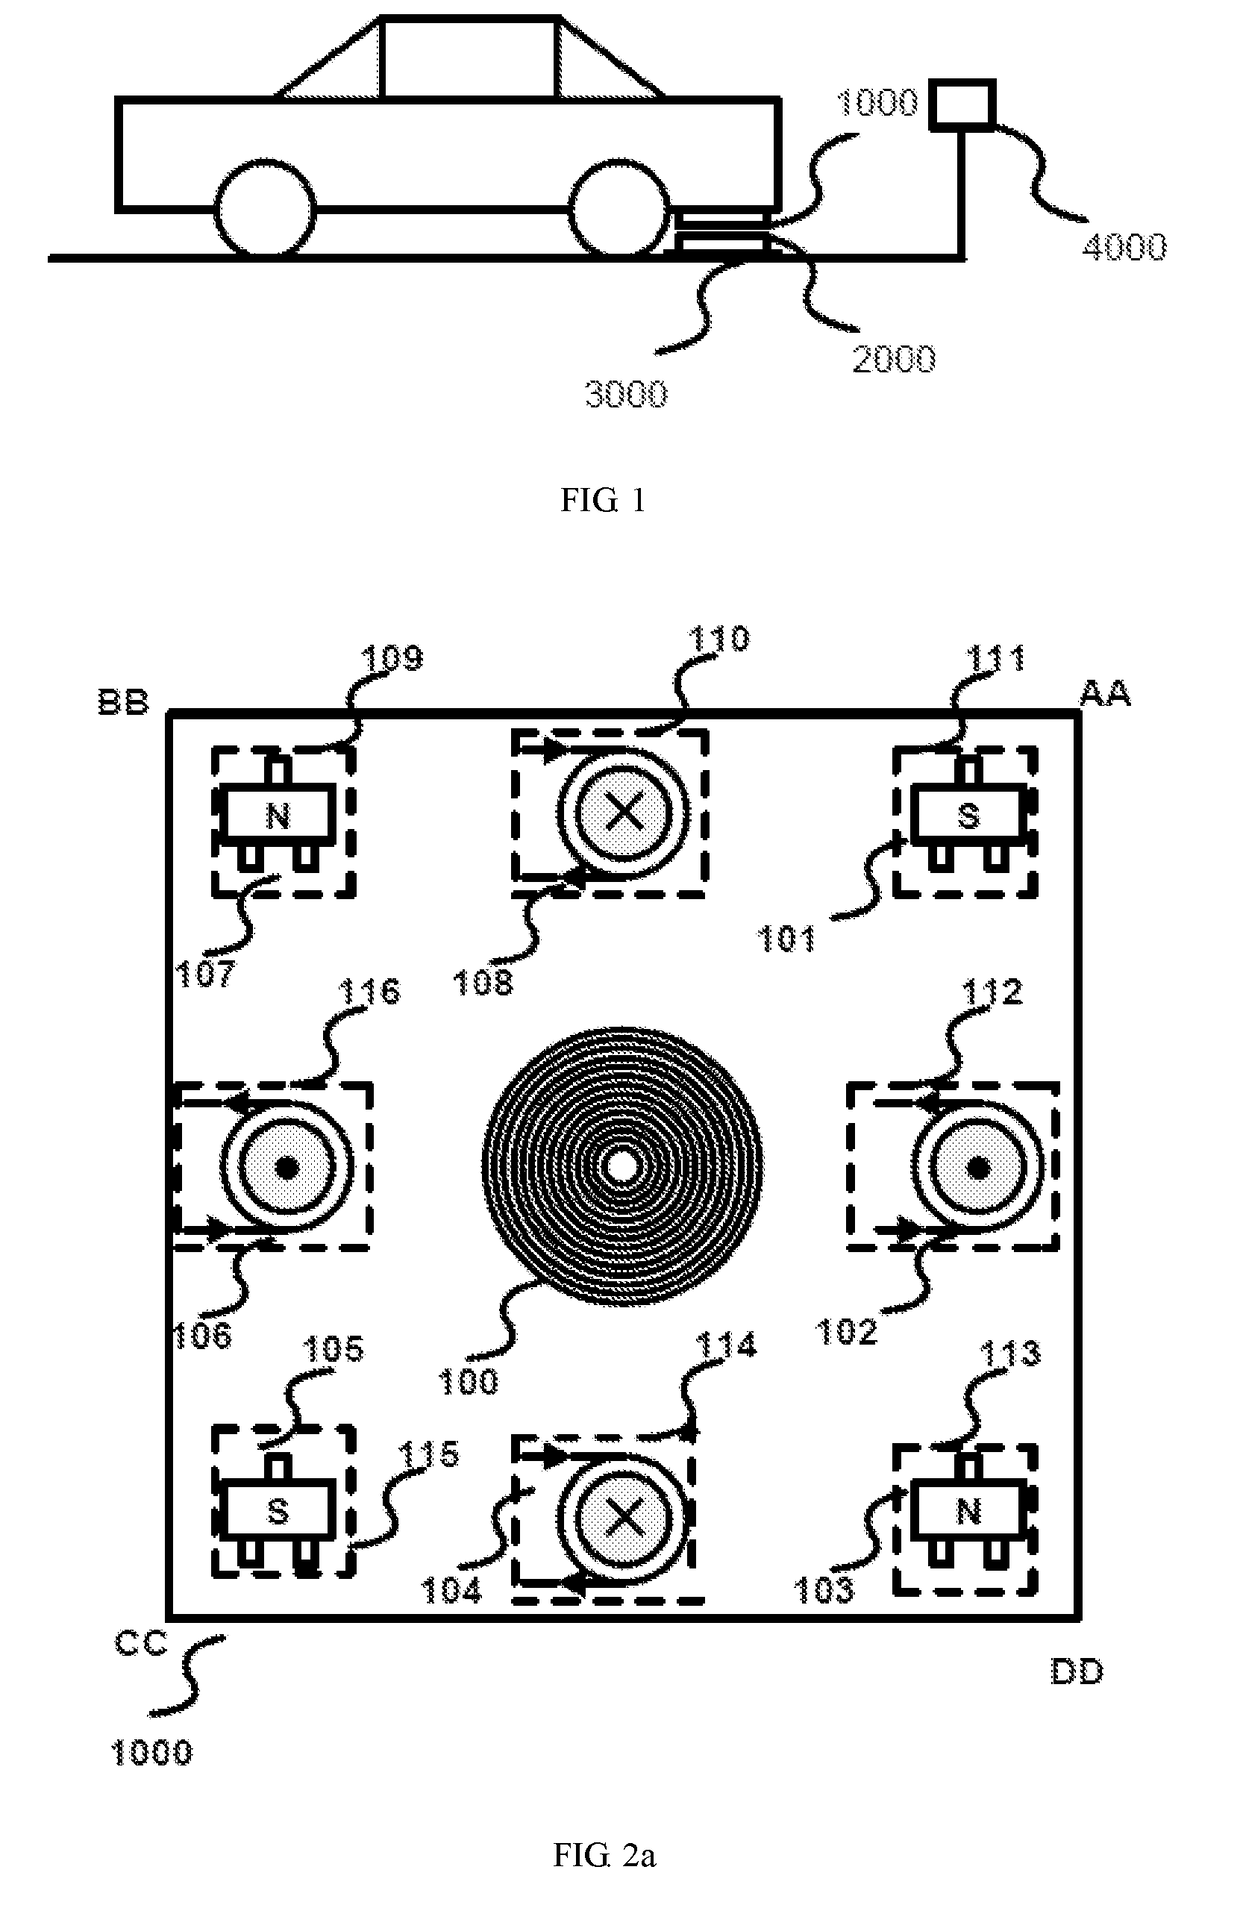 Aligning and matching system and method for wireless charging of automobile